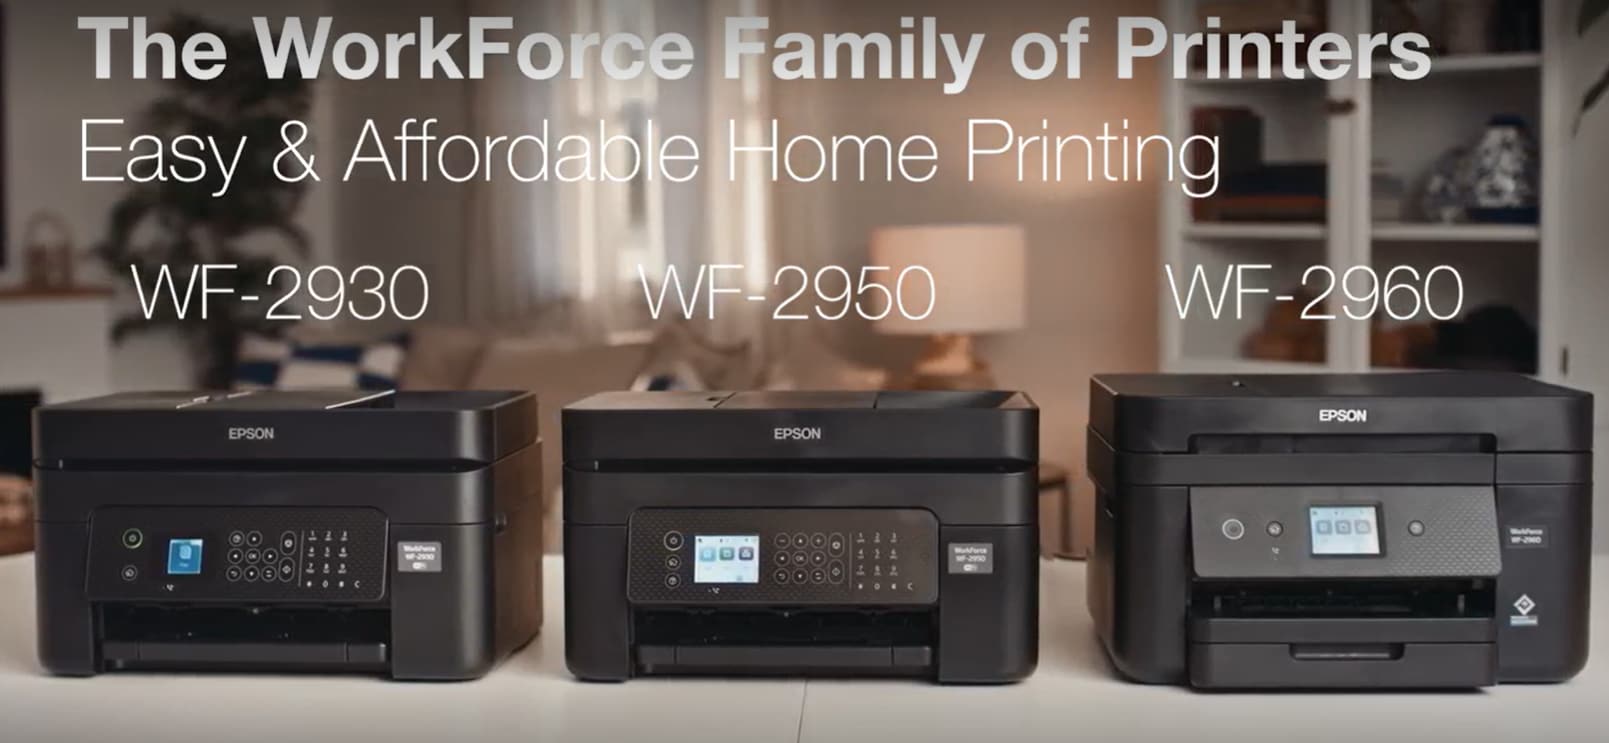 The WorkForce Family of Printers